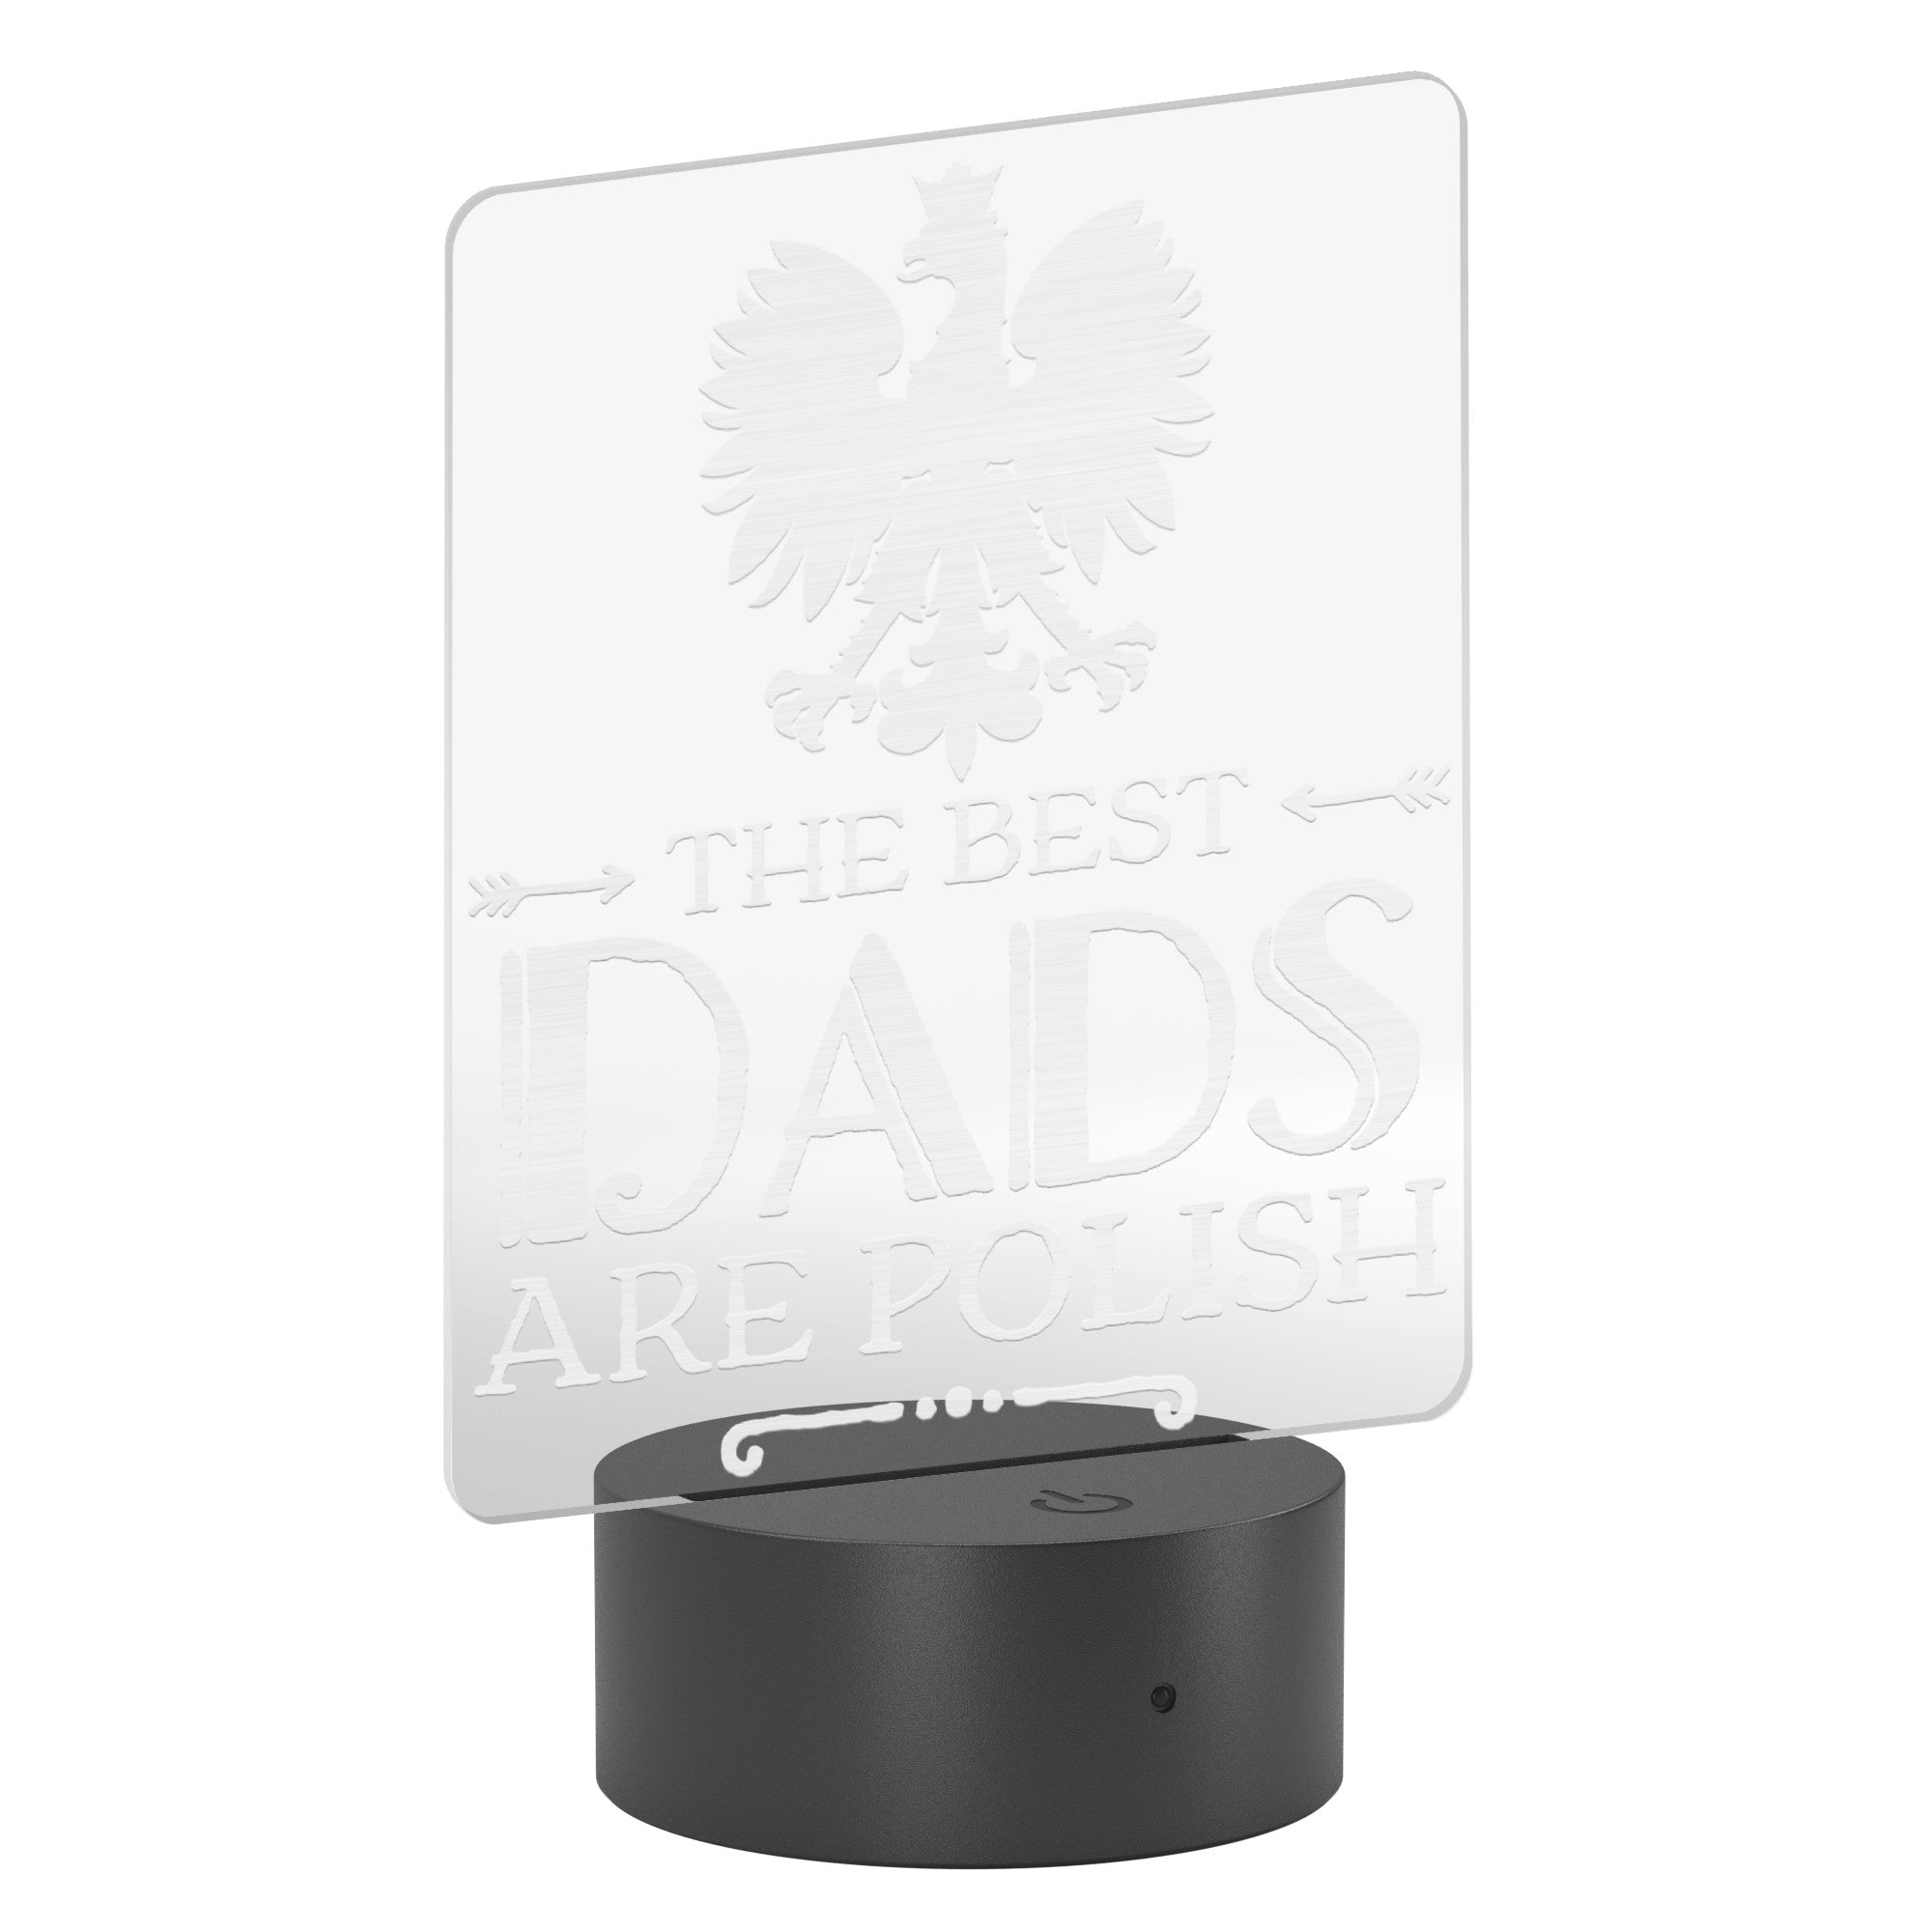 The Best Dads Are Polish Acrylic LED Sign LED Signs teelaunch   